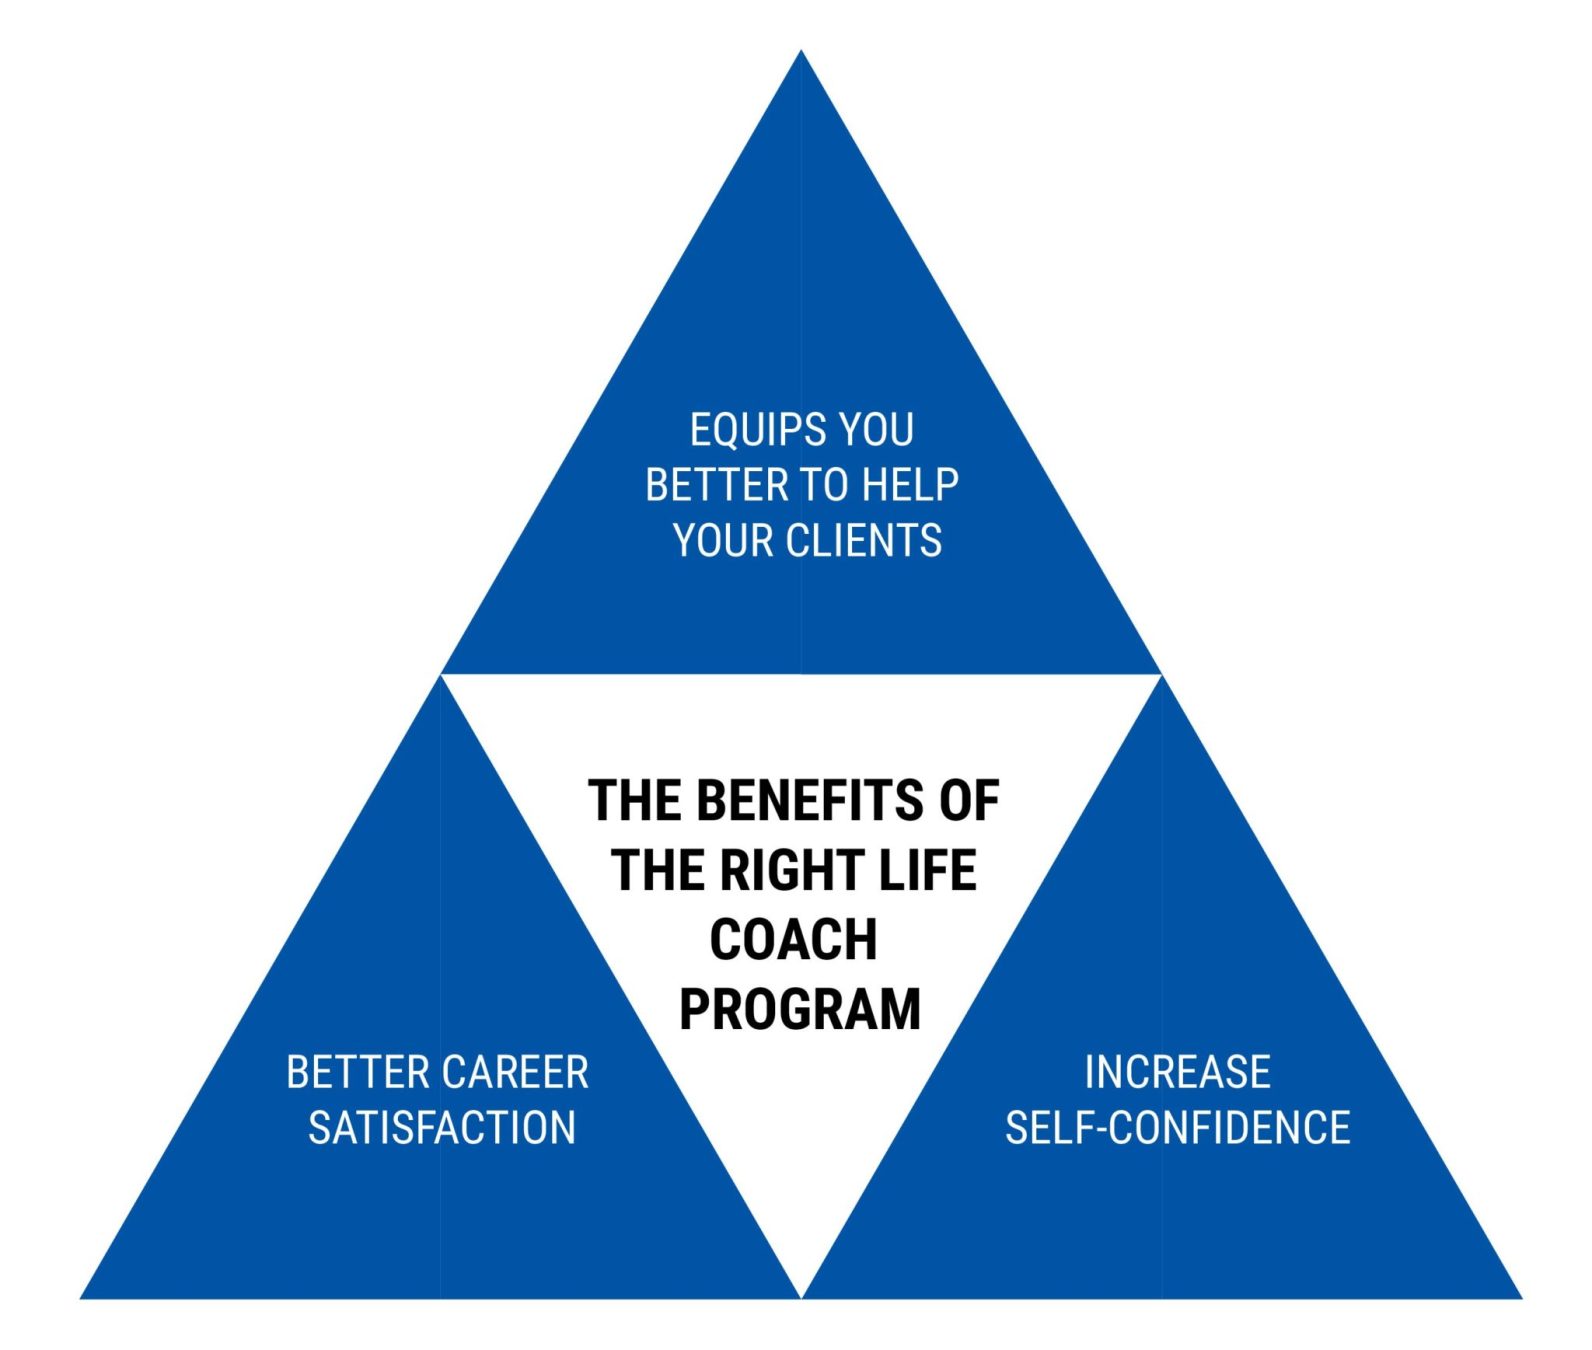 THE BENEFITS OF THE RIGHT LIFE COACHING PROGRAM